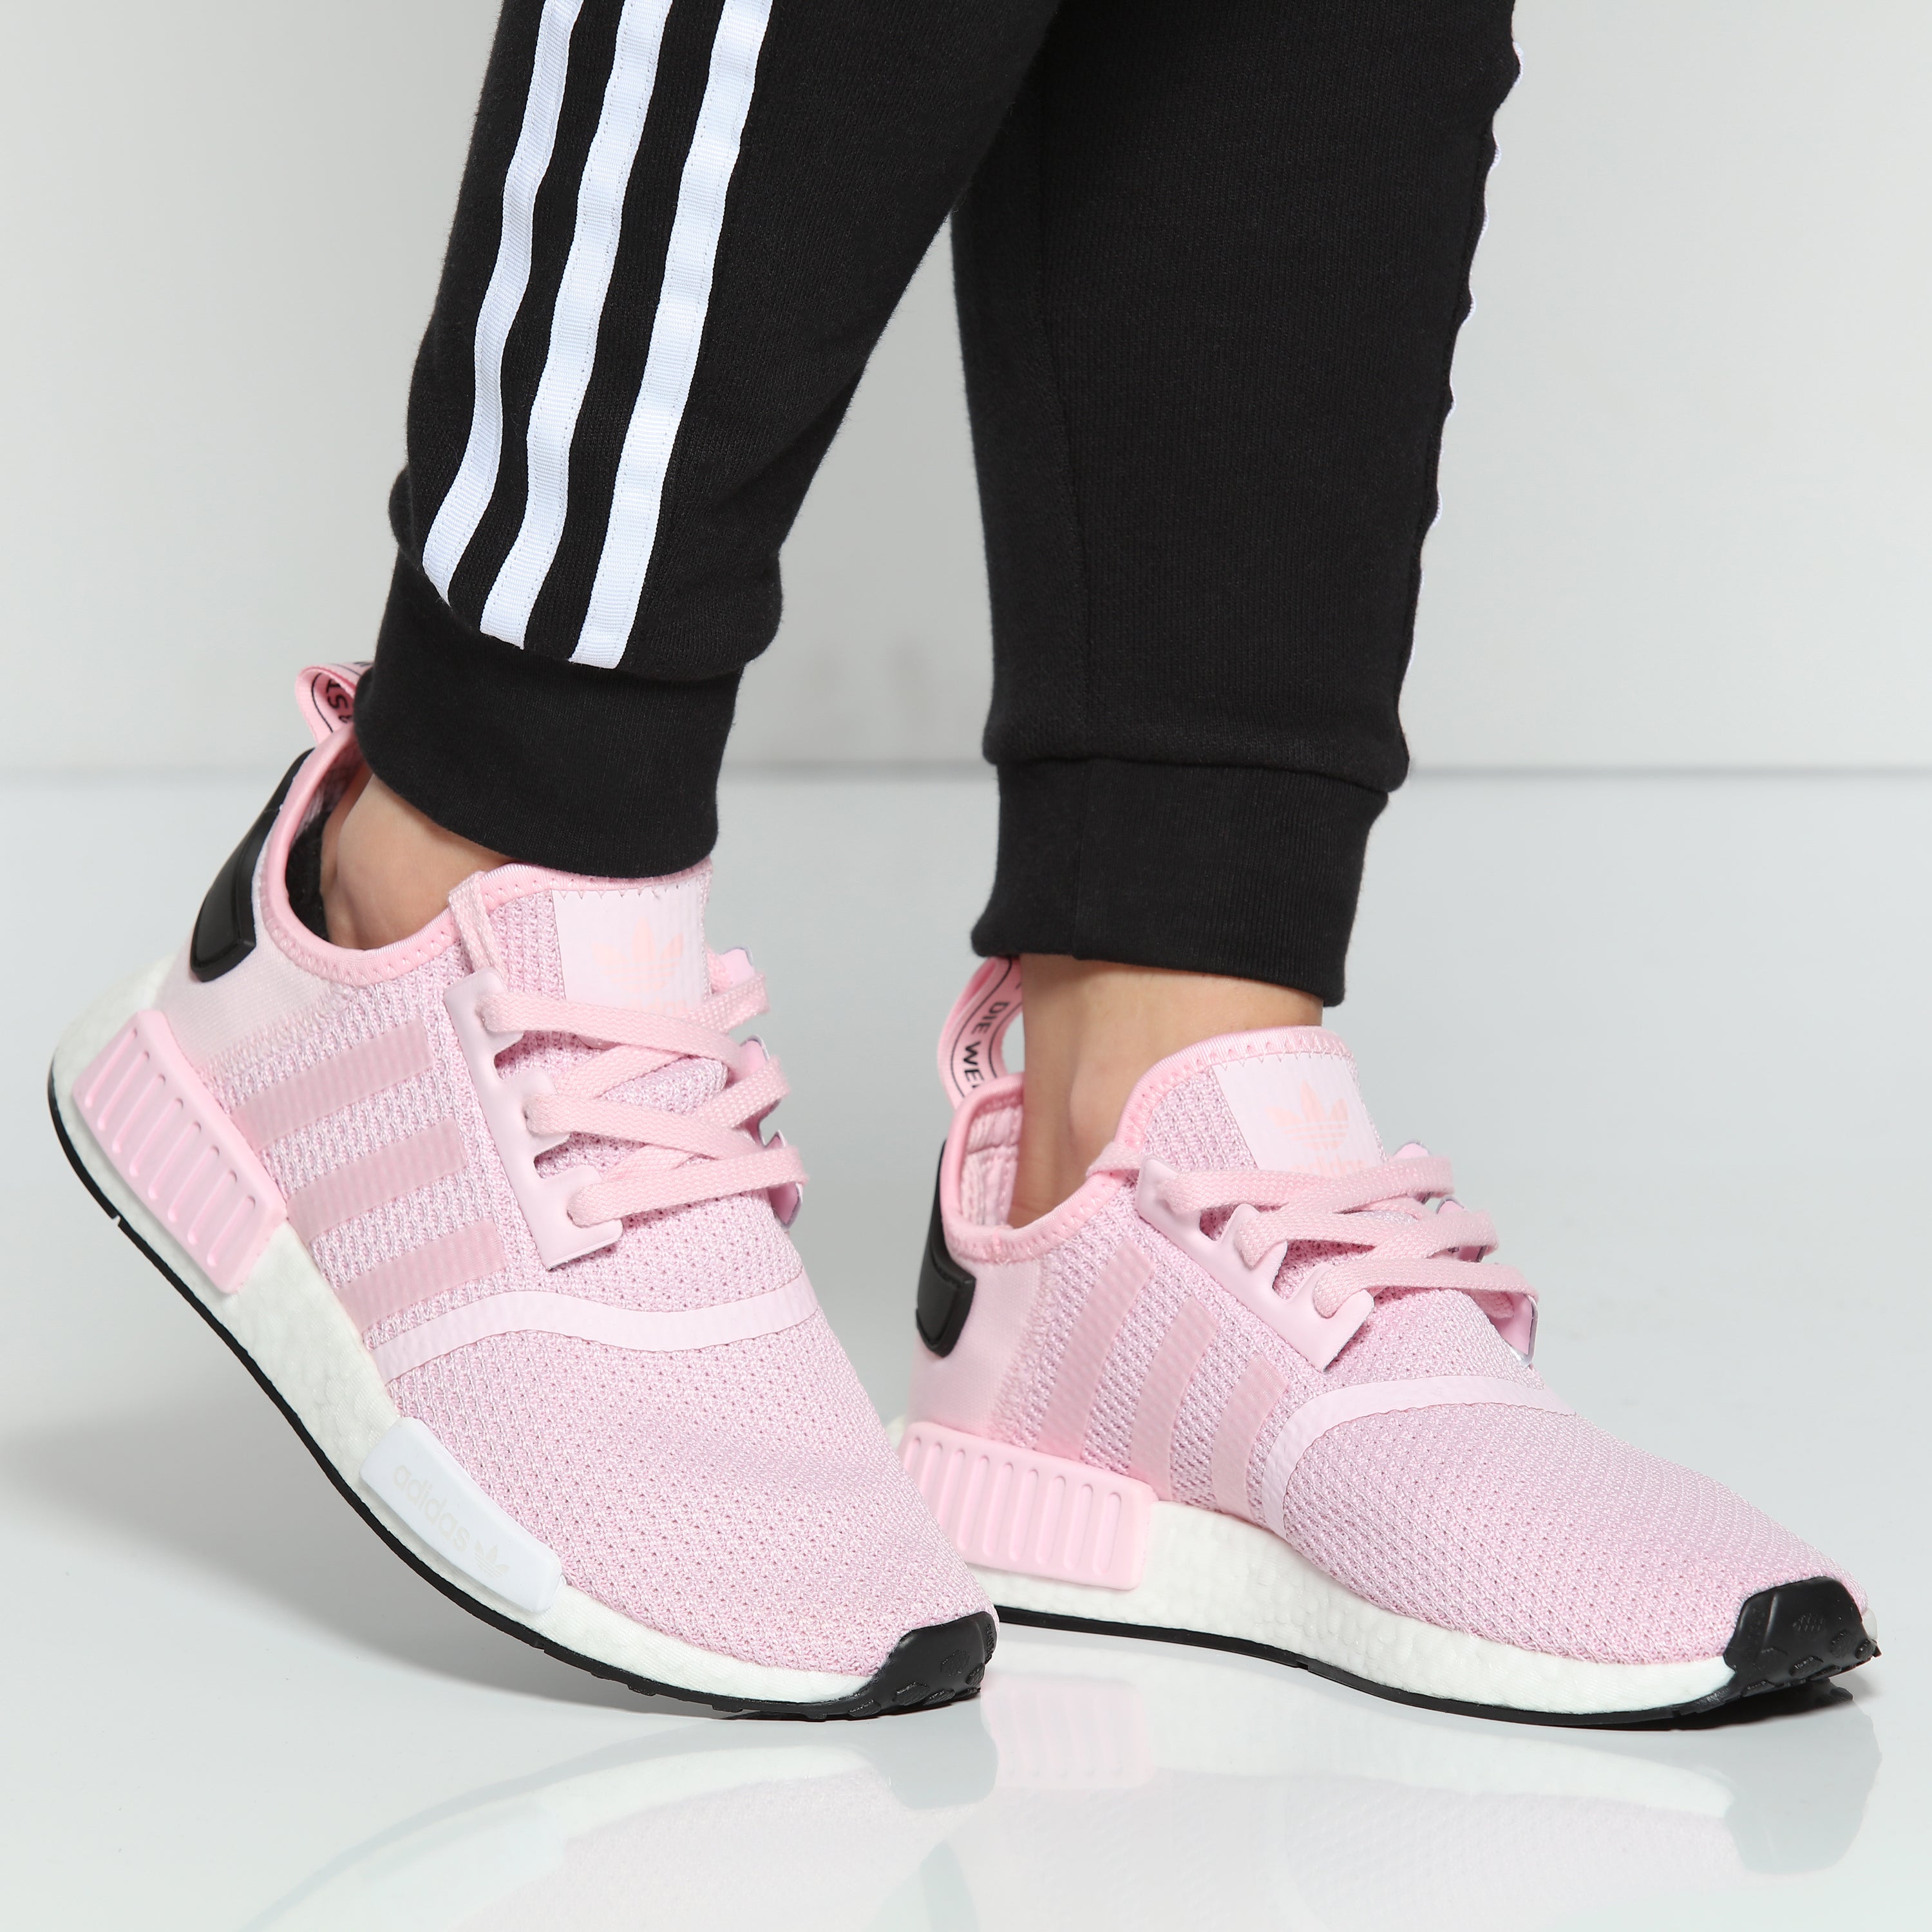 adidas nmd womens pink and black